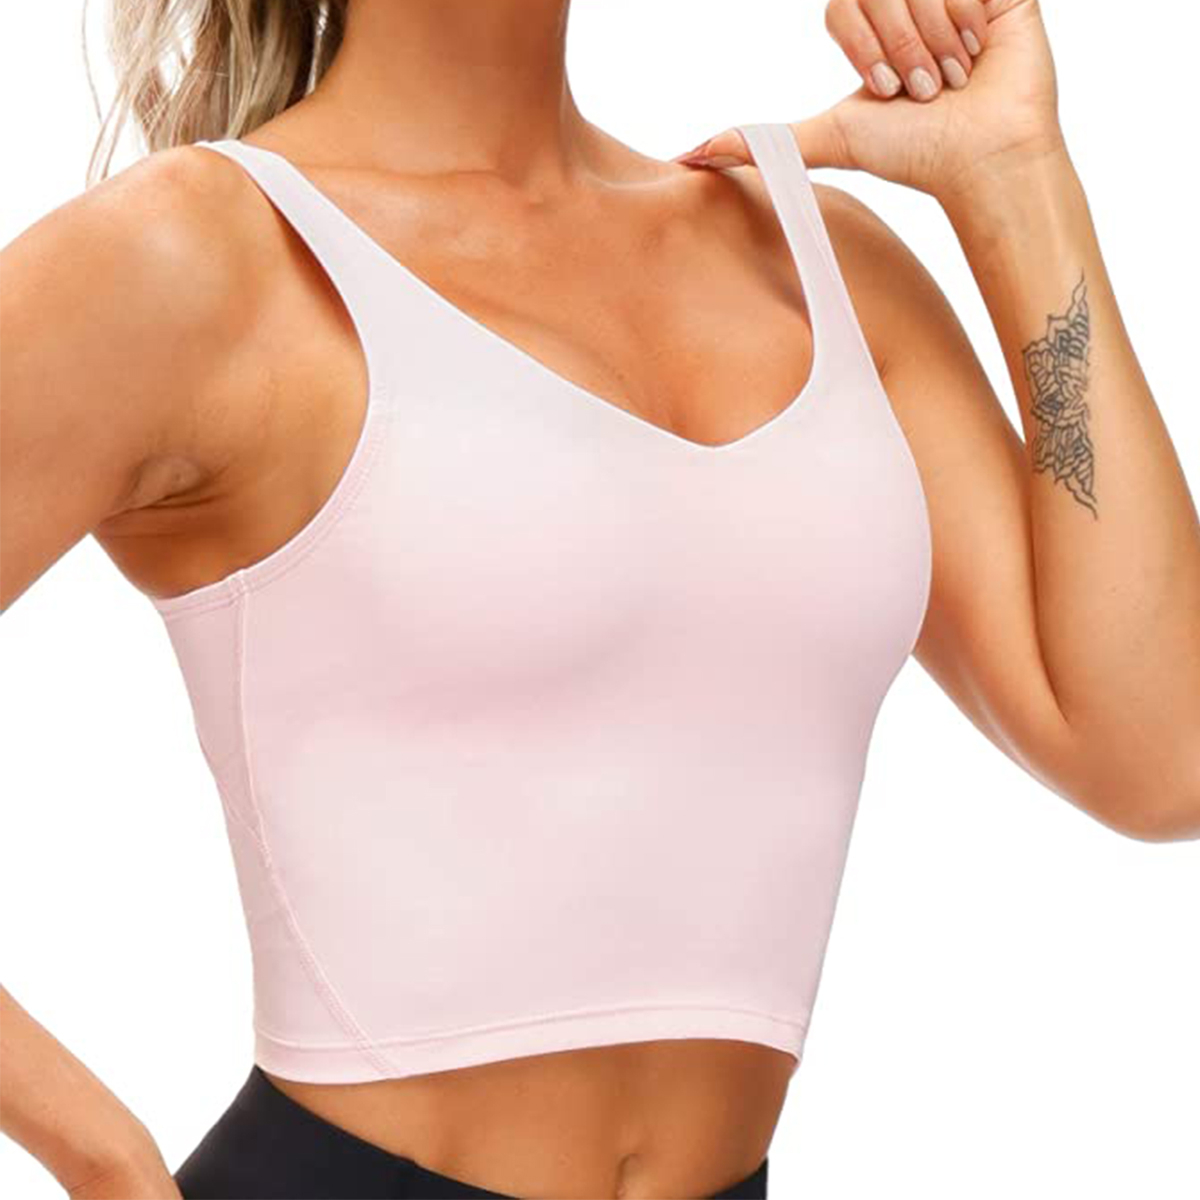 This $22 Sports Bra Doubles as a Gym Top & Has 17,300+ 5-Star Reviews